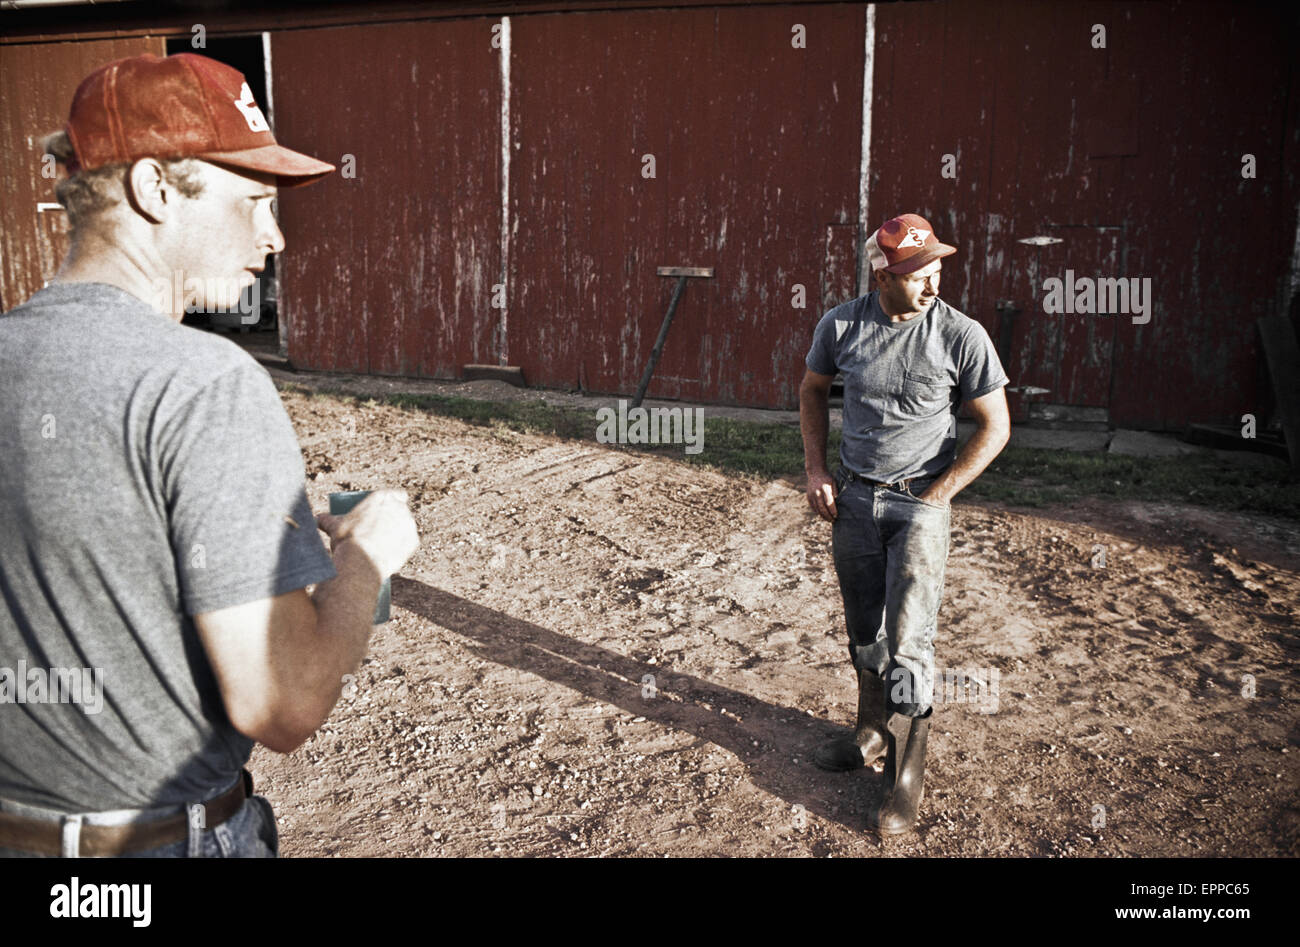 Two dairy farmers in Keymar, Maryland  talk over some details with each other before working. Stock Photo